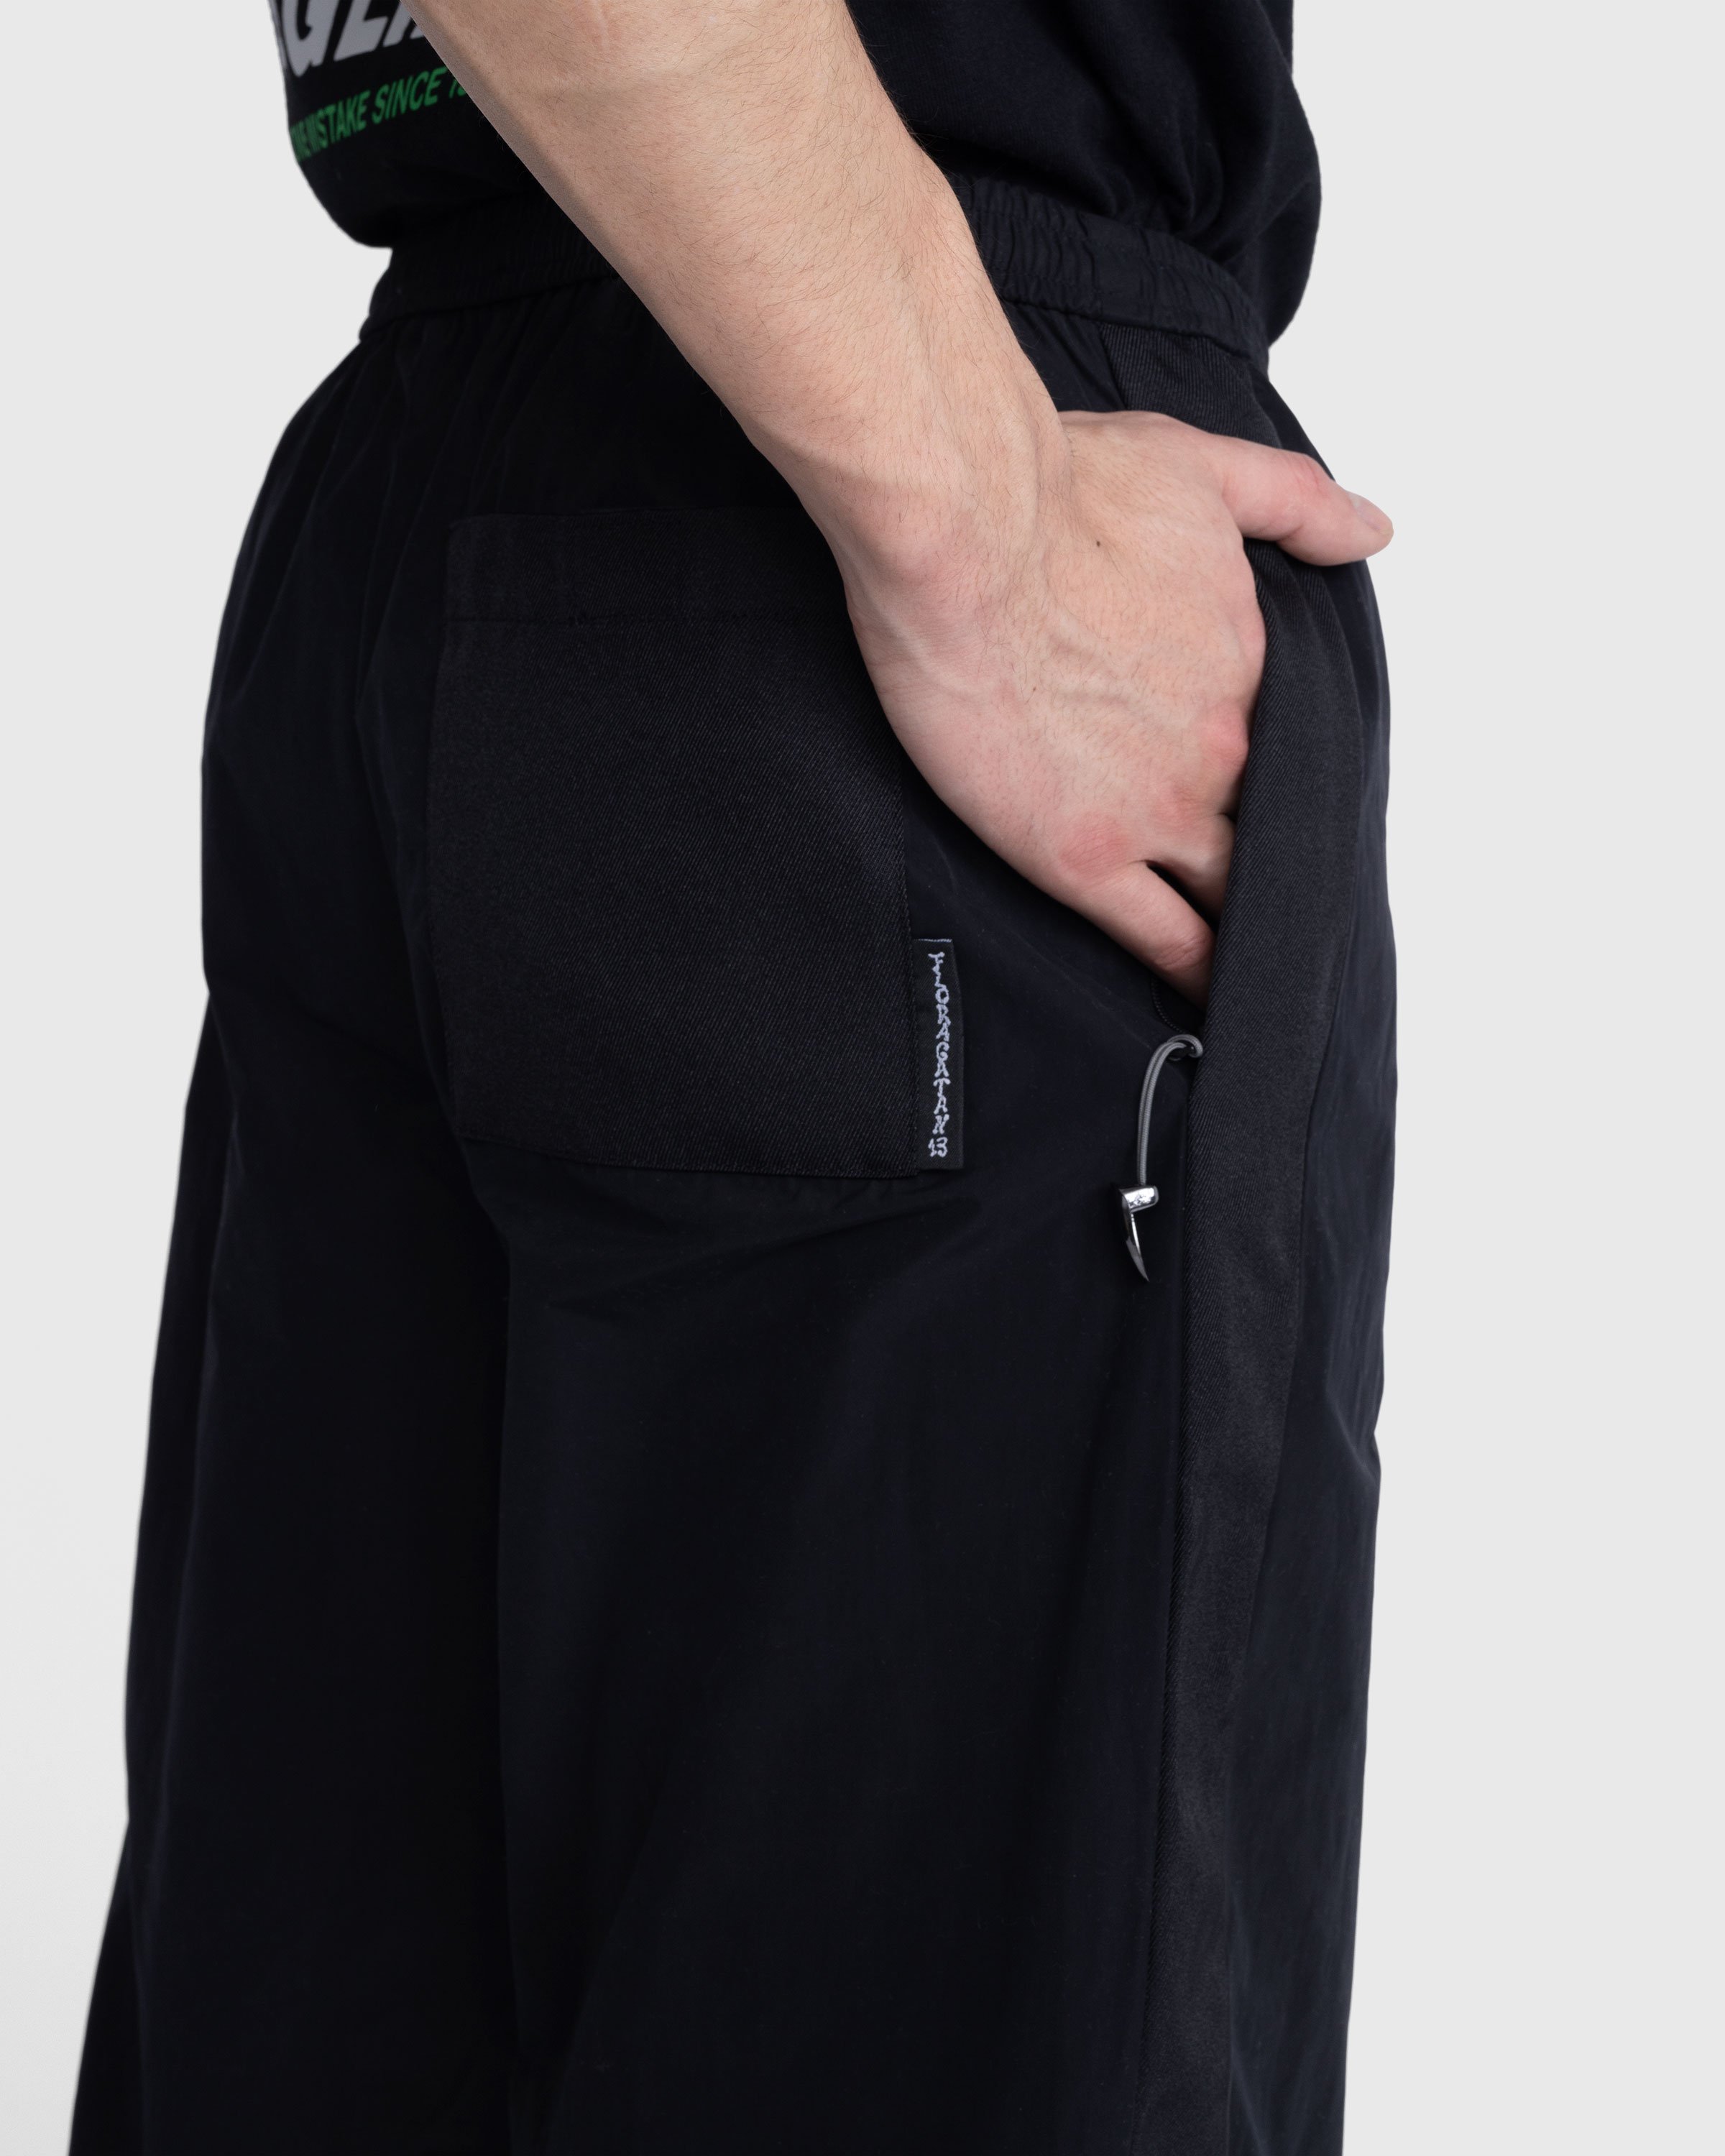 Acne Studios - Relaxed Fit Trousers Black - Clothing - Black - Image 5